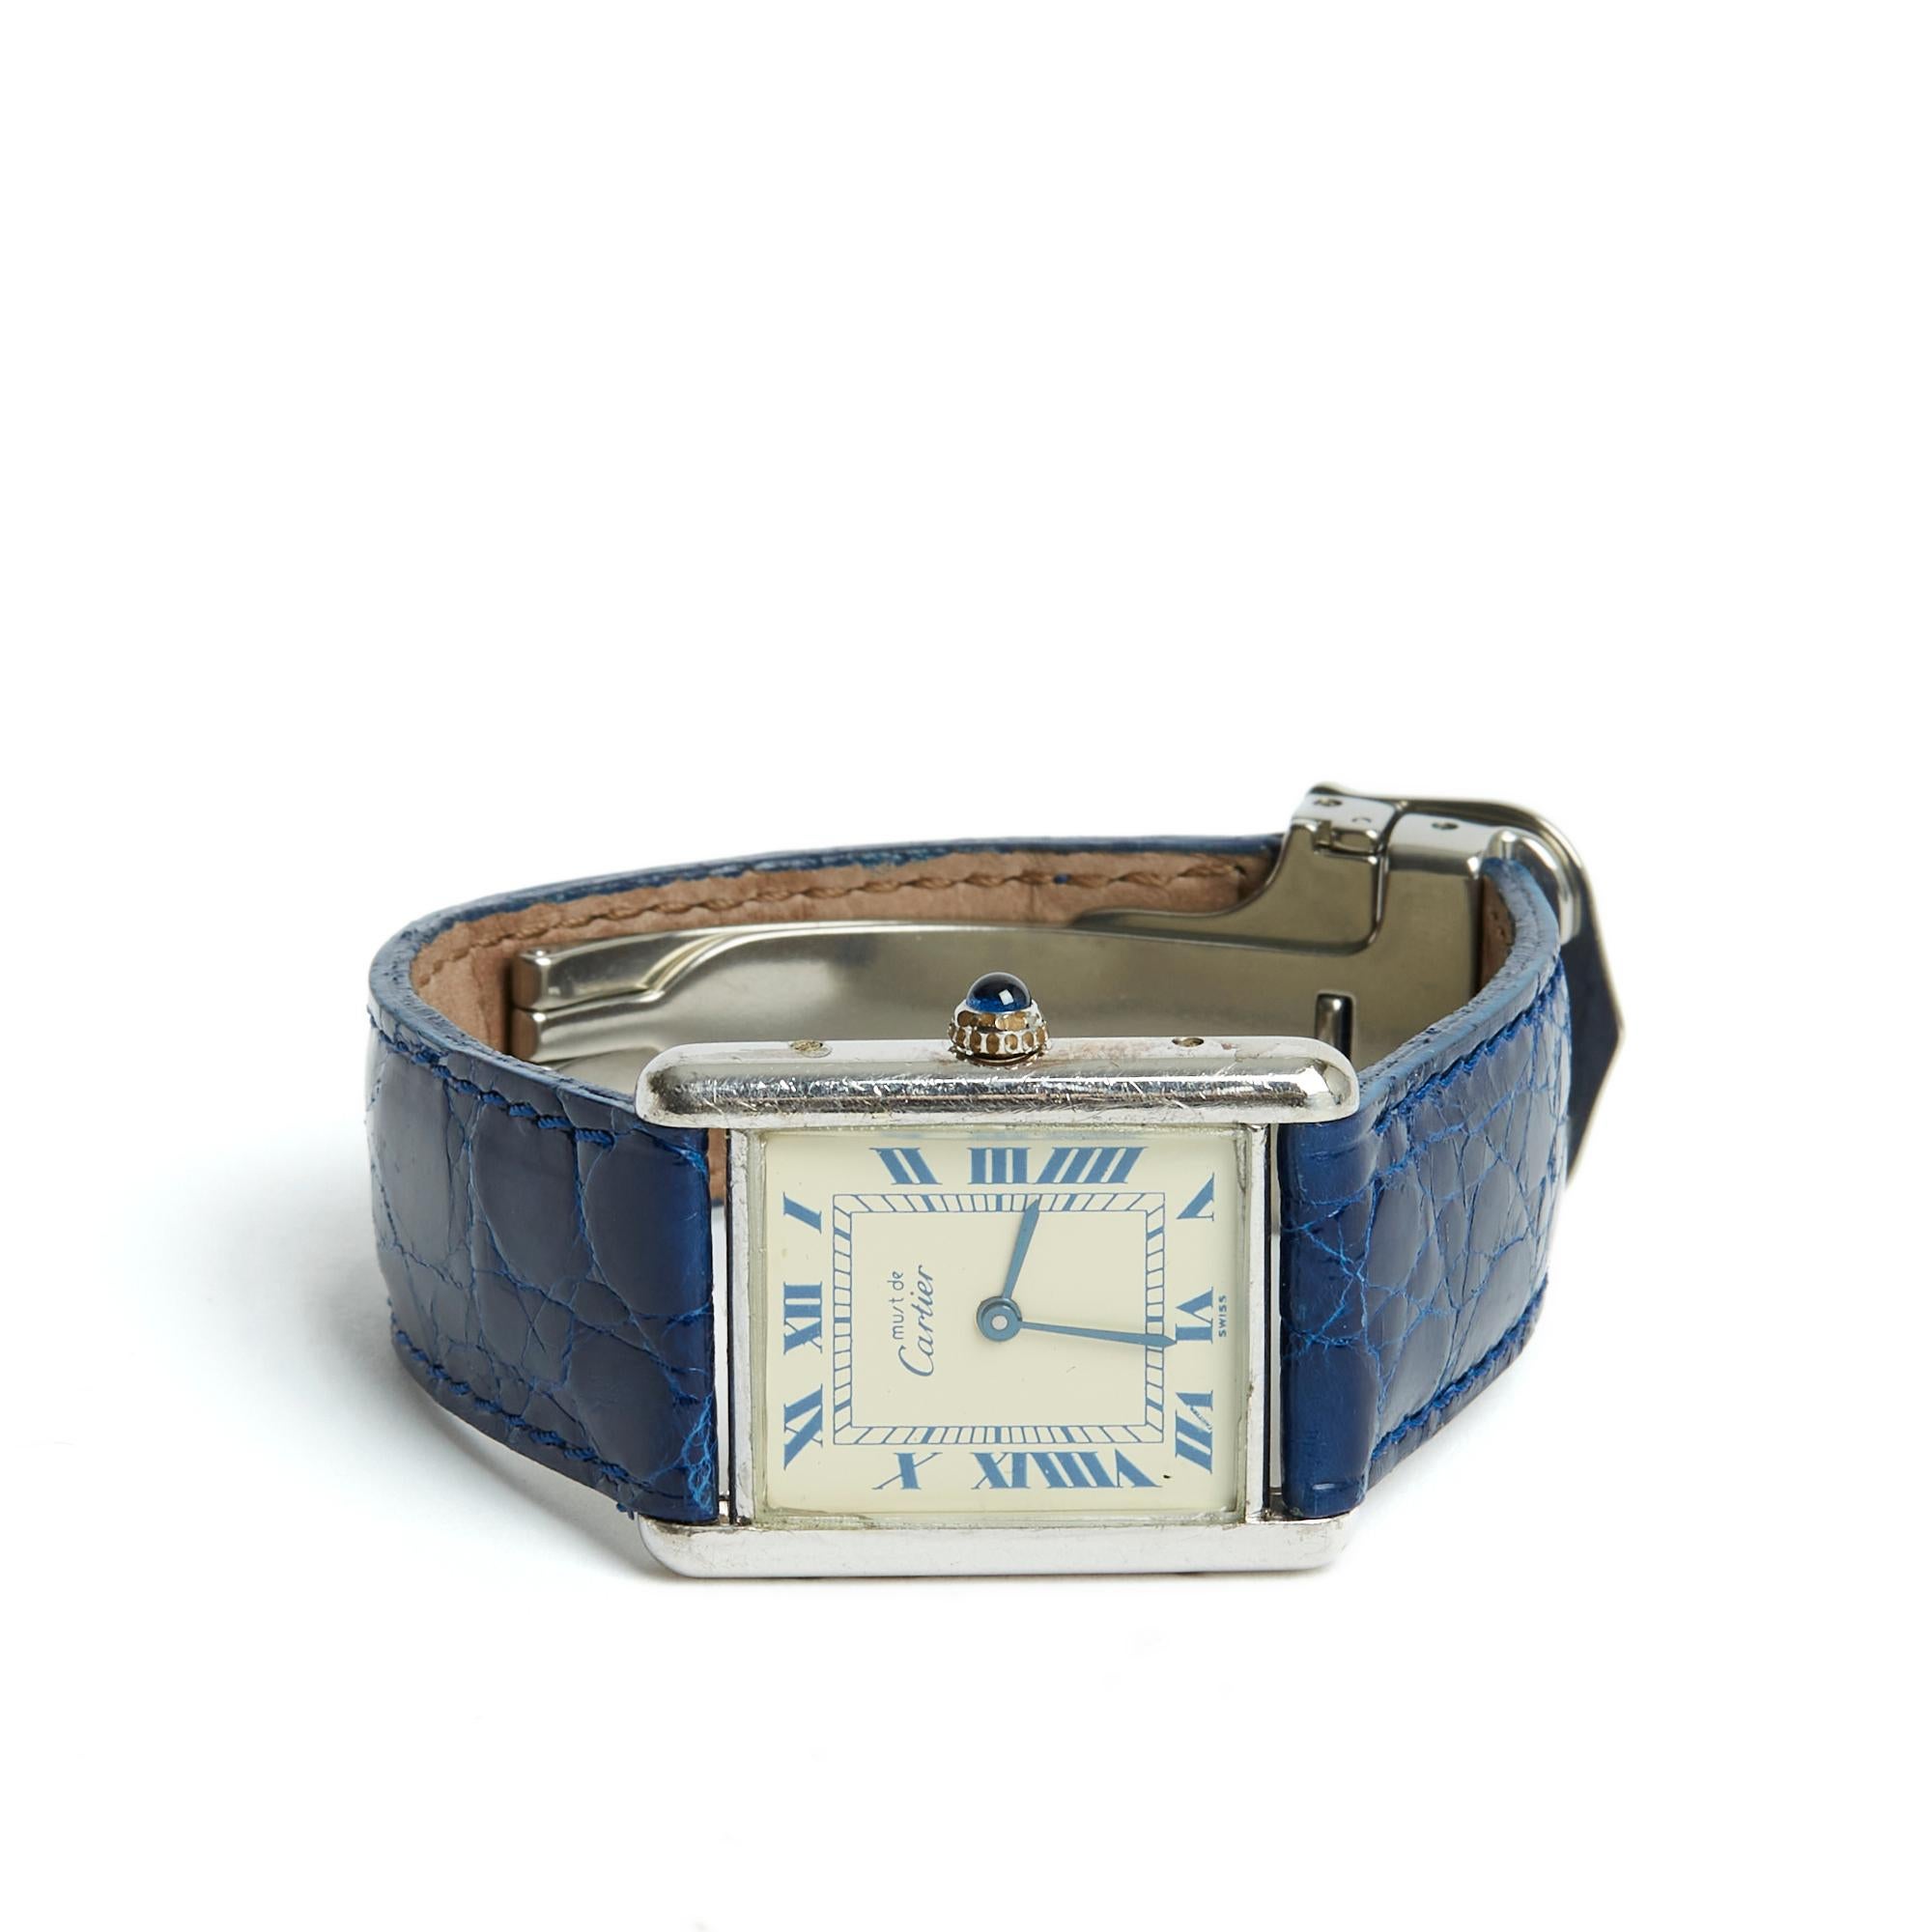 Cartier Must model Tank watch in 925/1000 silver, ecru background with blue railway indexes and Roman numerals, quartz movement, blue exotic leather strap, Cartier folding clasp in steel. Case width 23 mm (excluding crown), bracelet for 15.5 cm